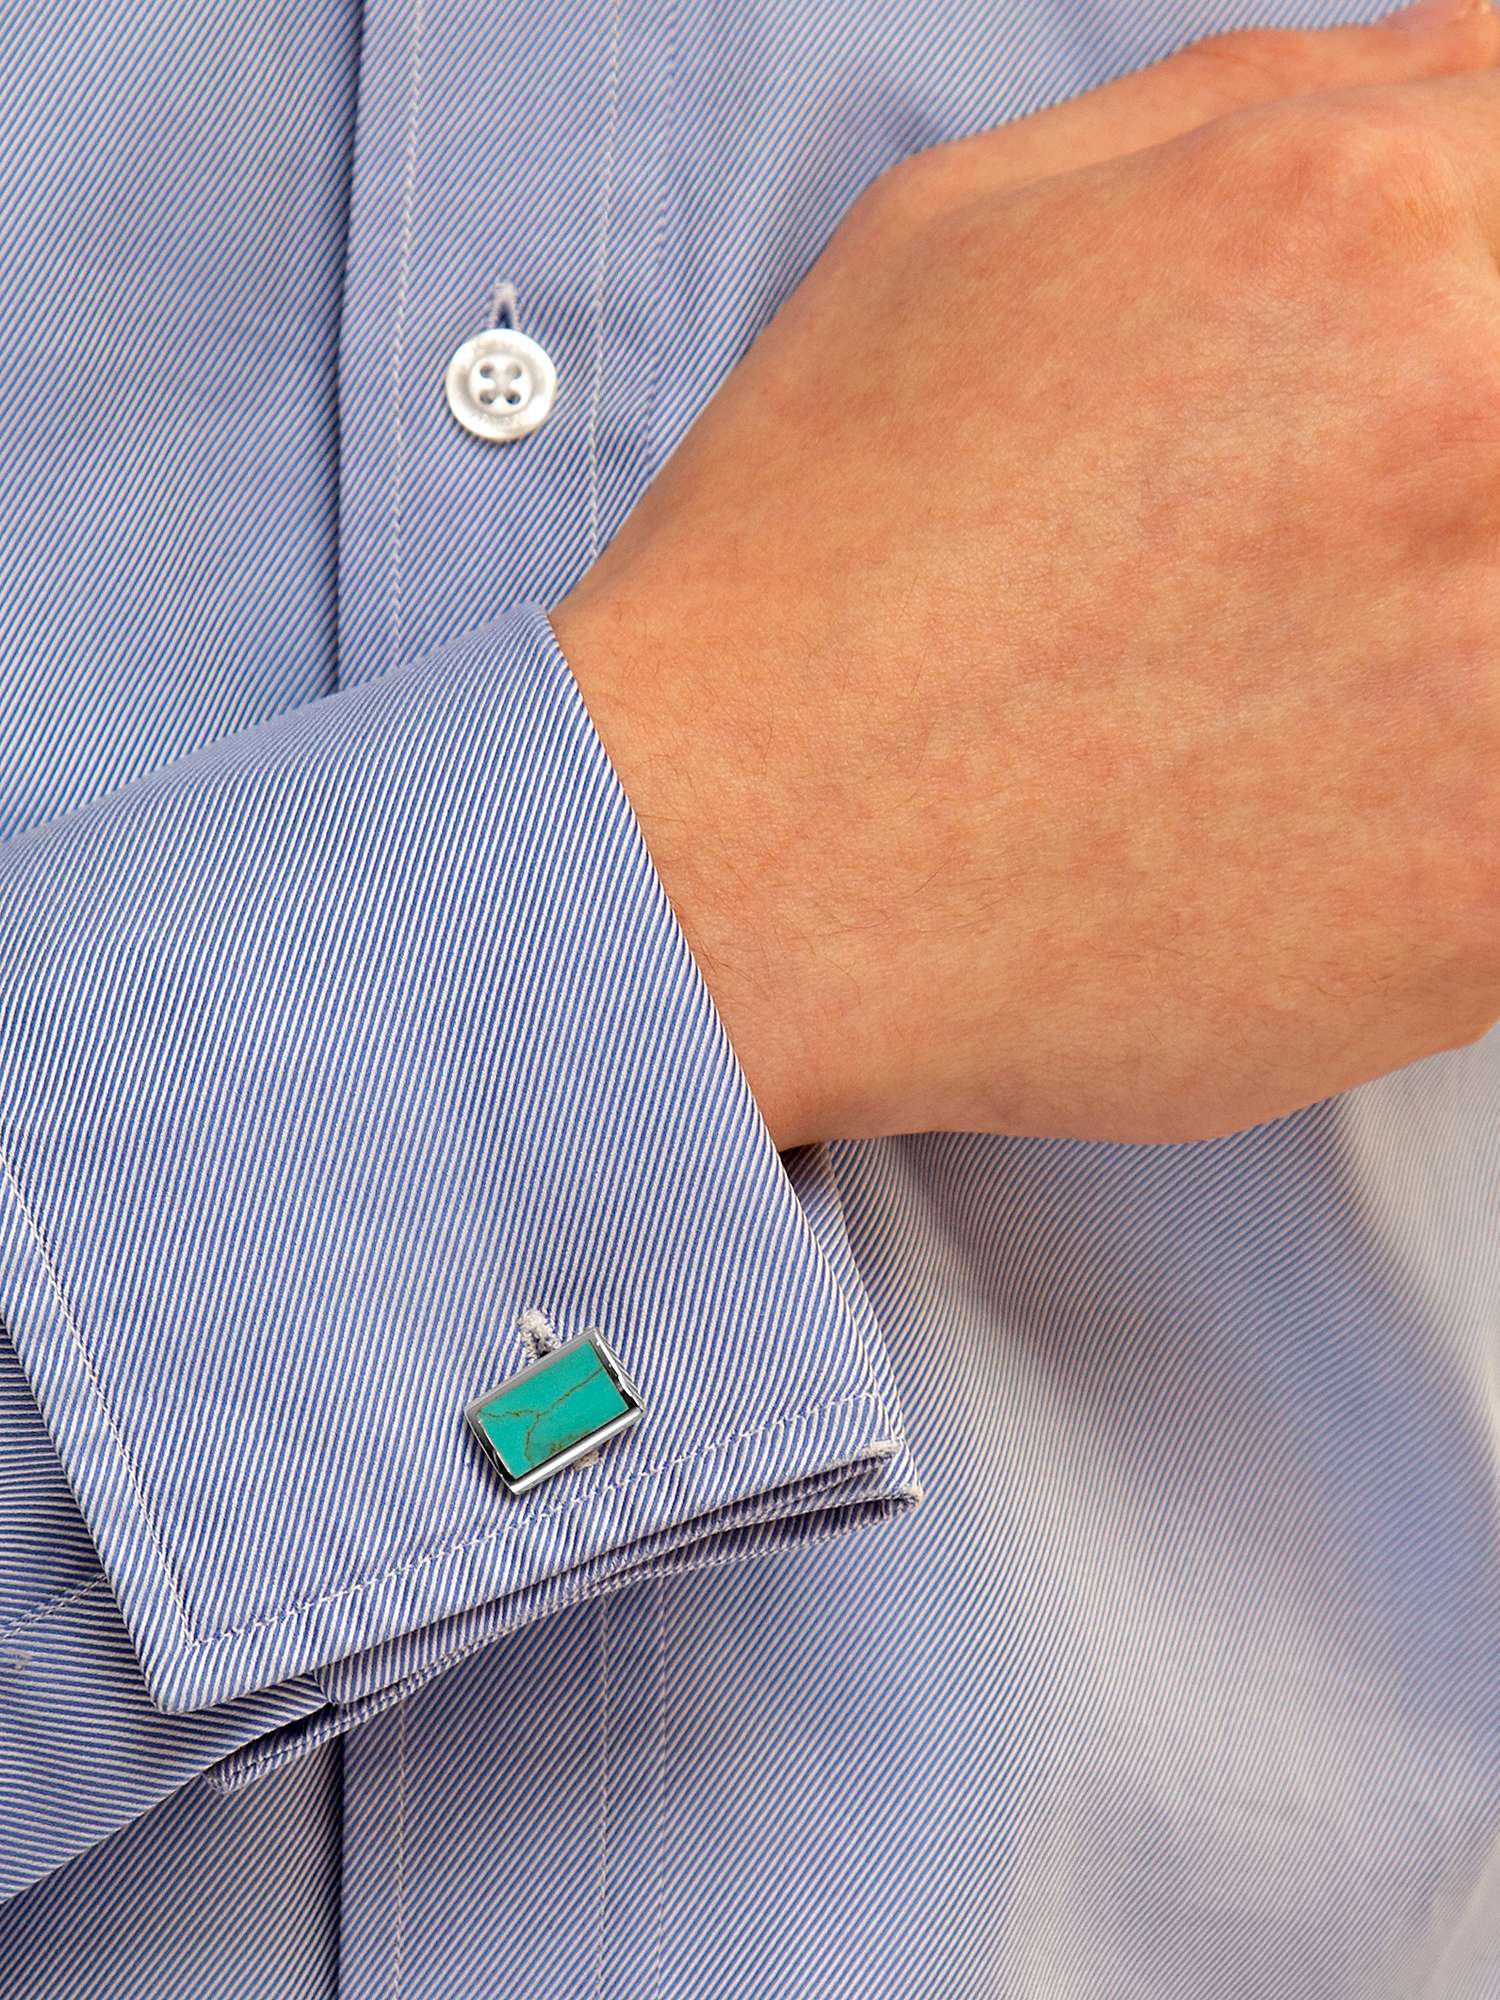 Buy Hoxton London Turquoise Rectangle Cufflinks, Silver/Blue Online at johnlewis.com